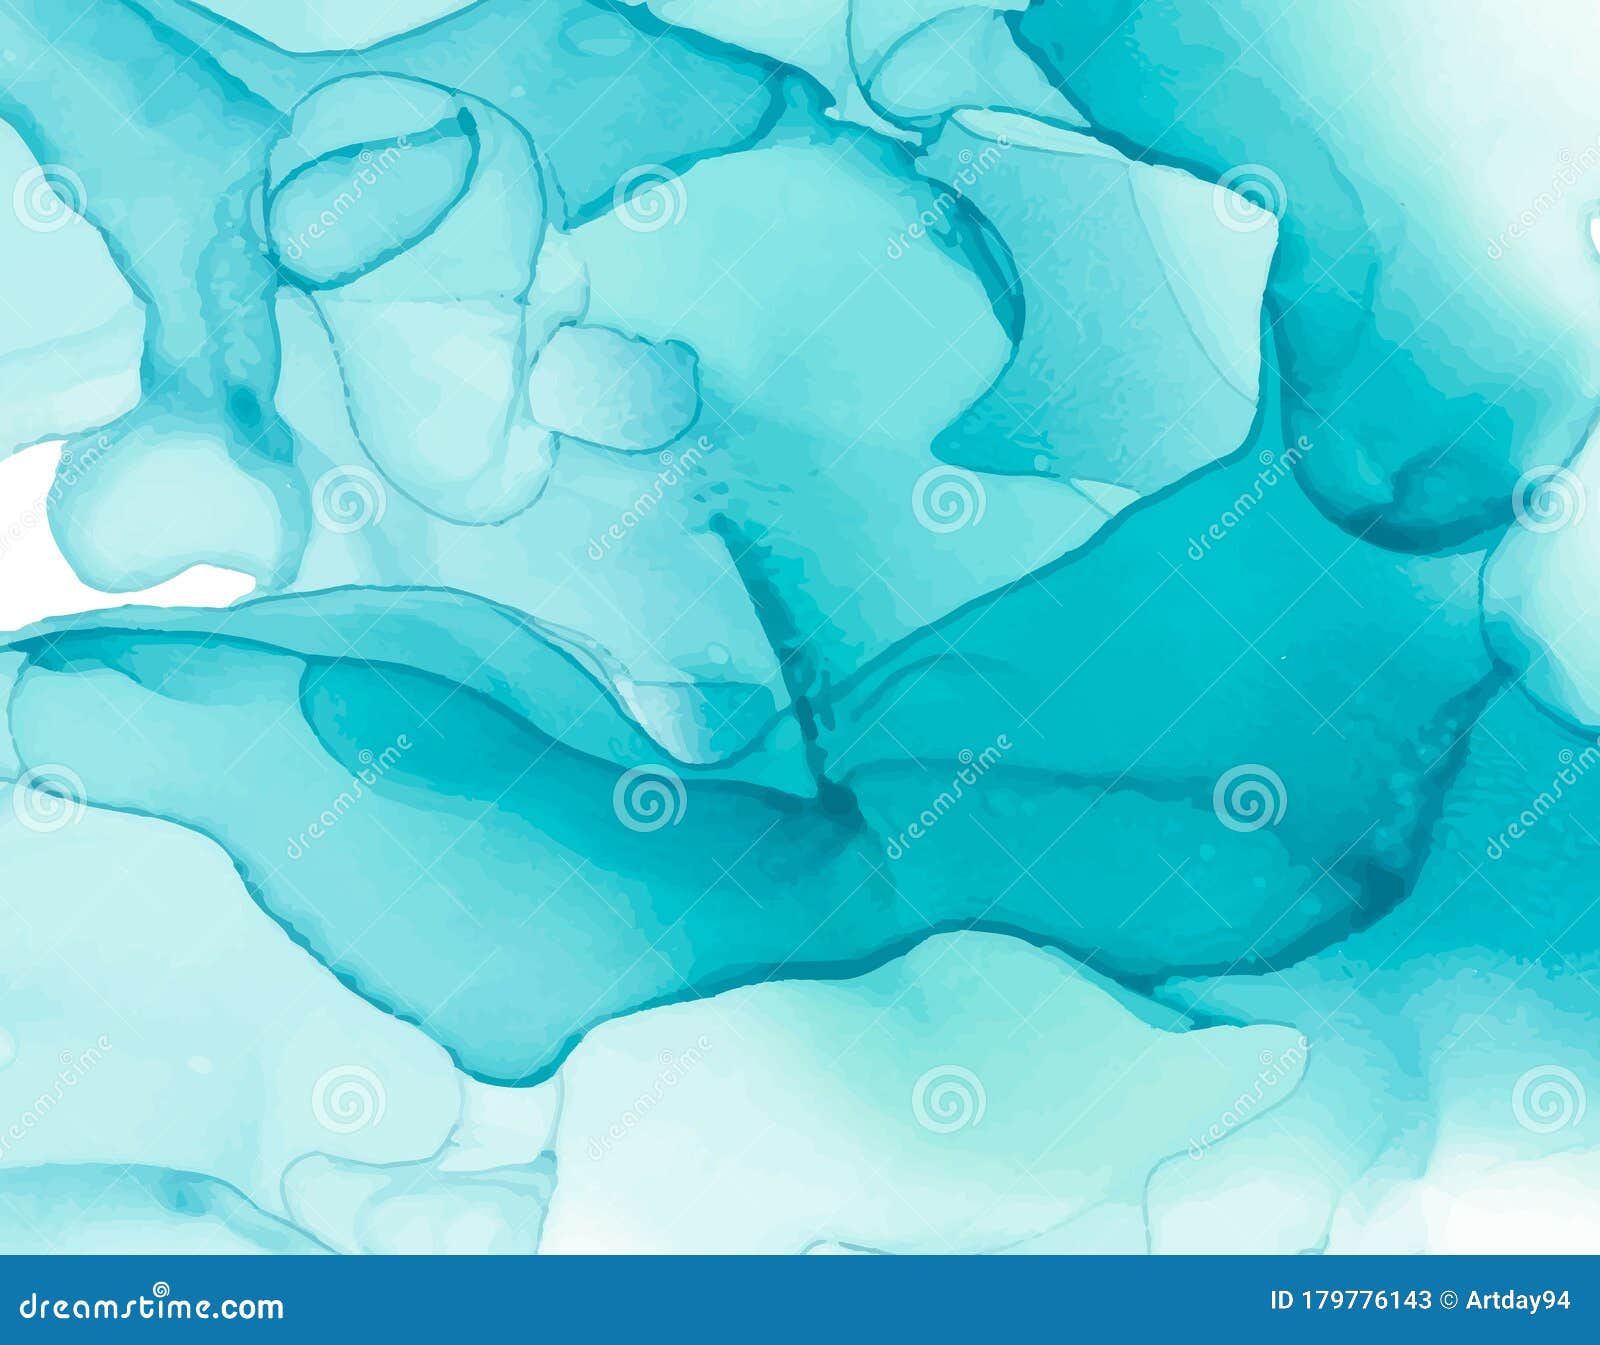 Alcohol Ink Texture. Abstract Blue Hand Painted Background. Fluid Art ...